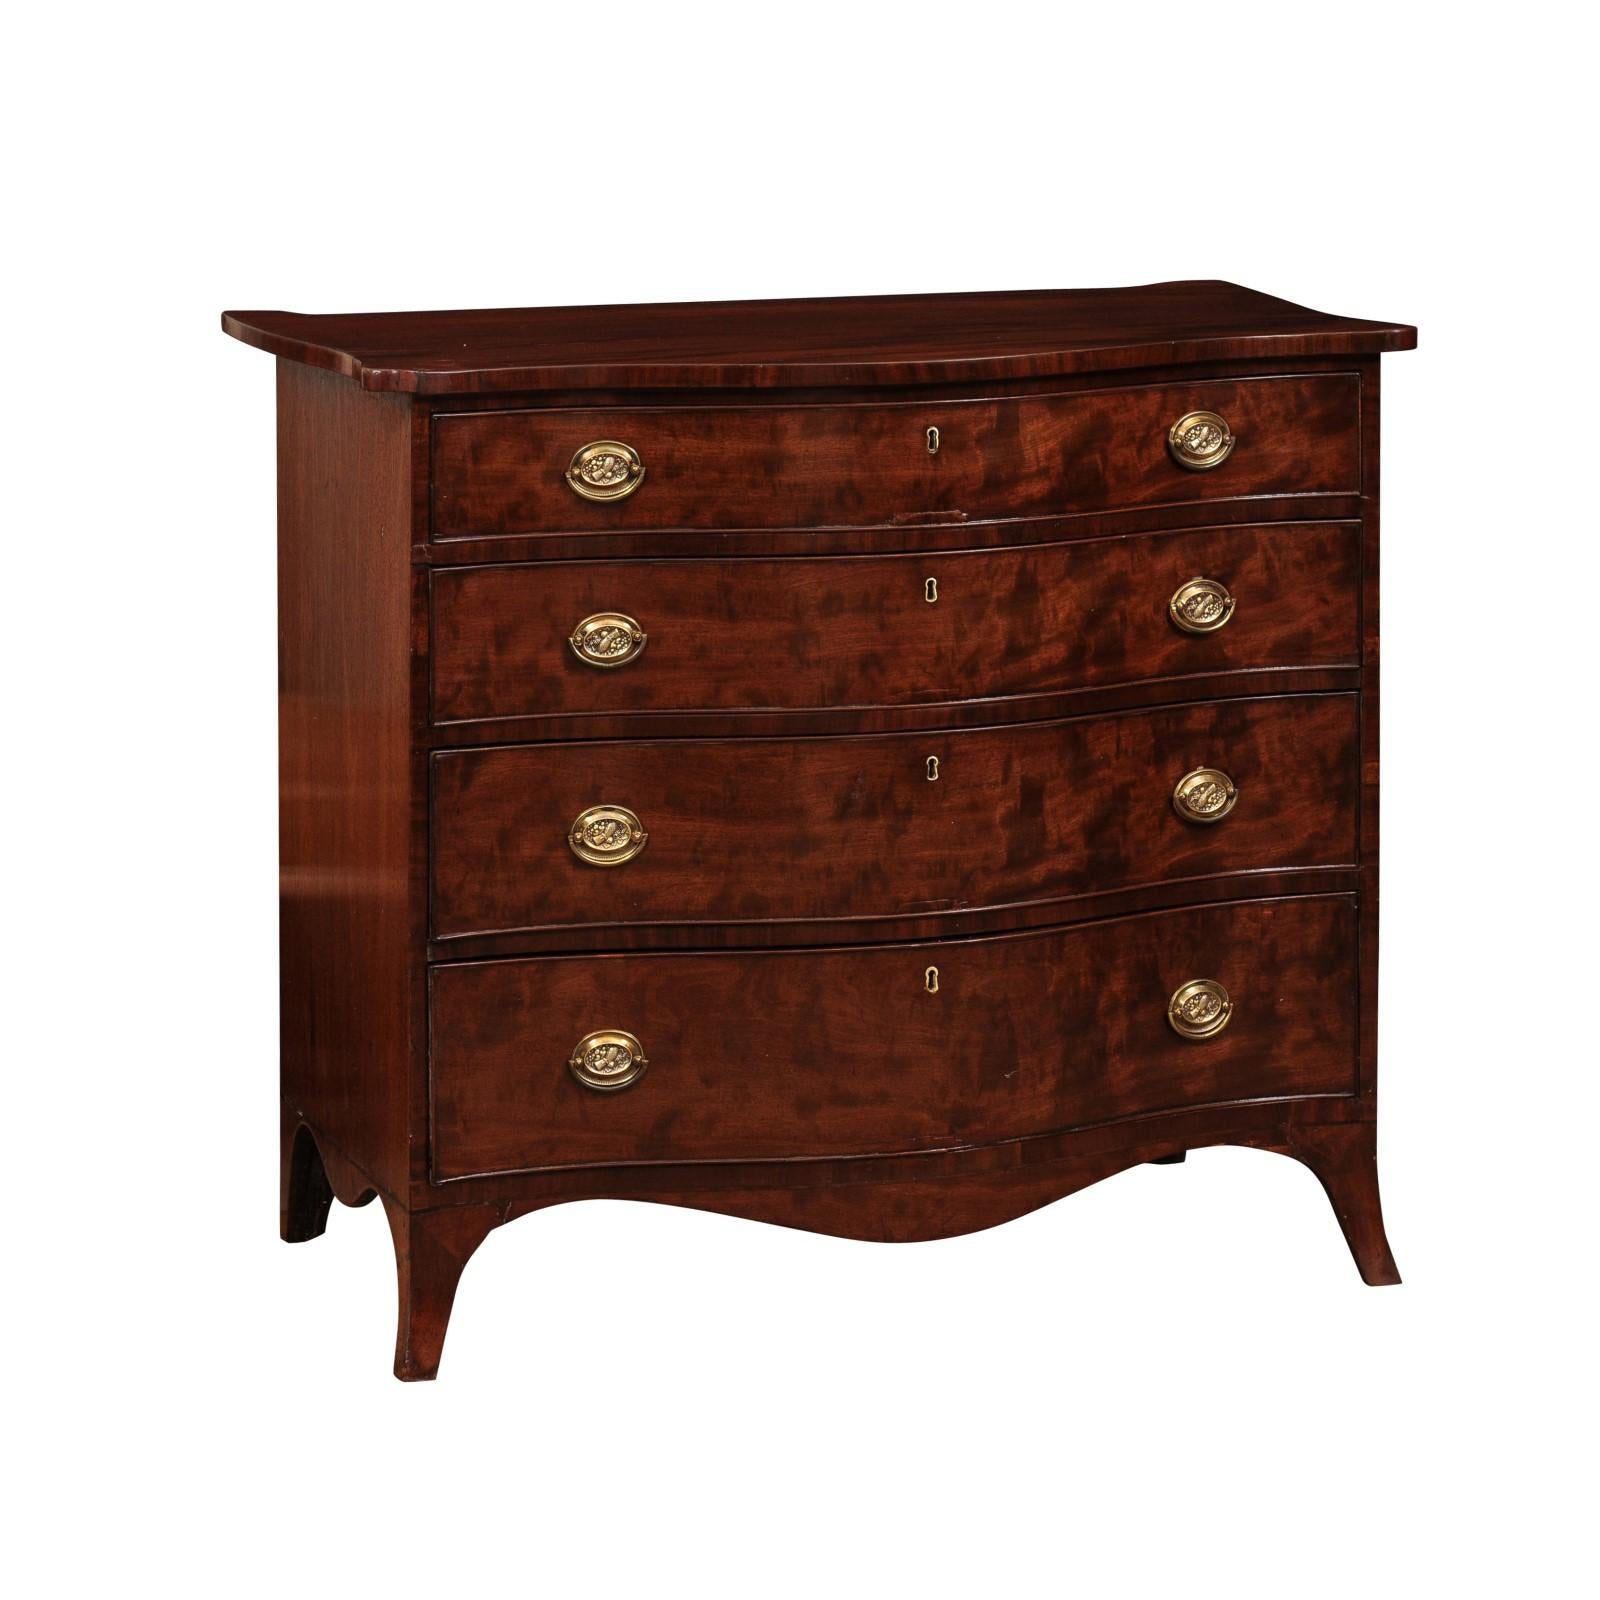 English George III Mahogany Serpentine Chest with 4 Graduating Drawers, Late 18th Century